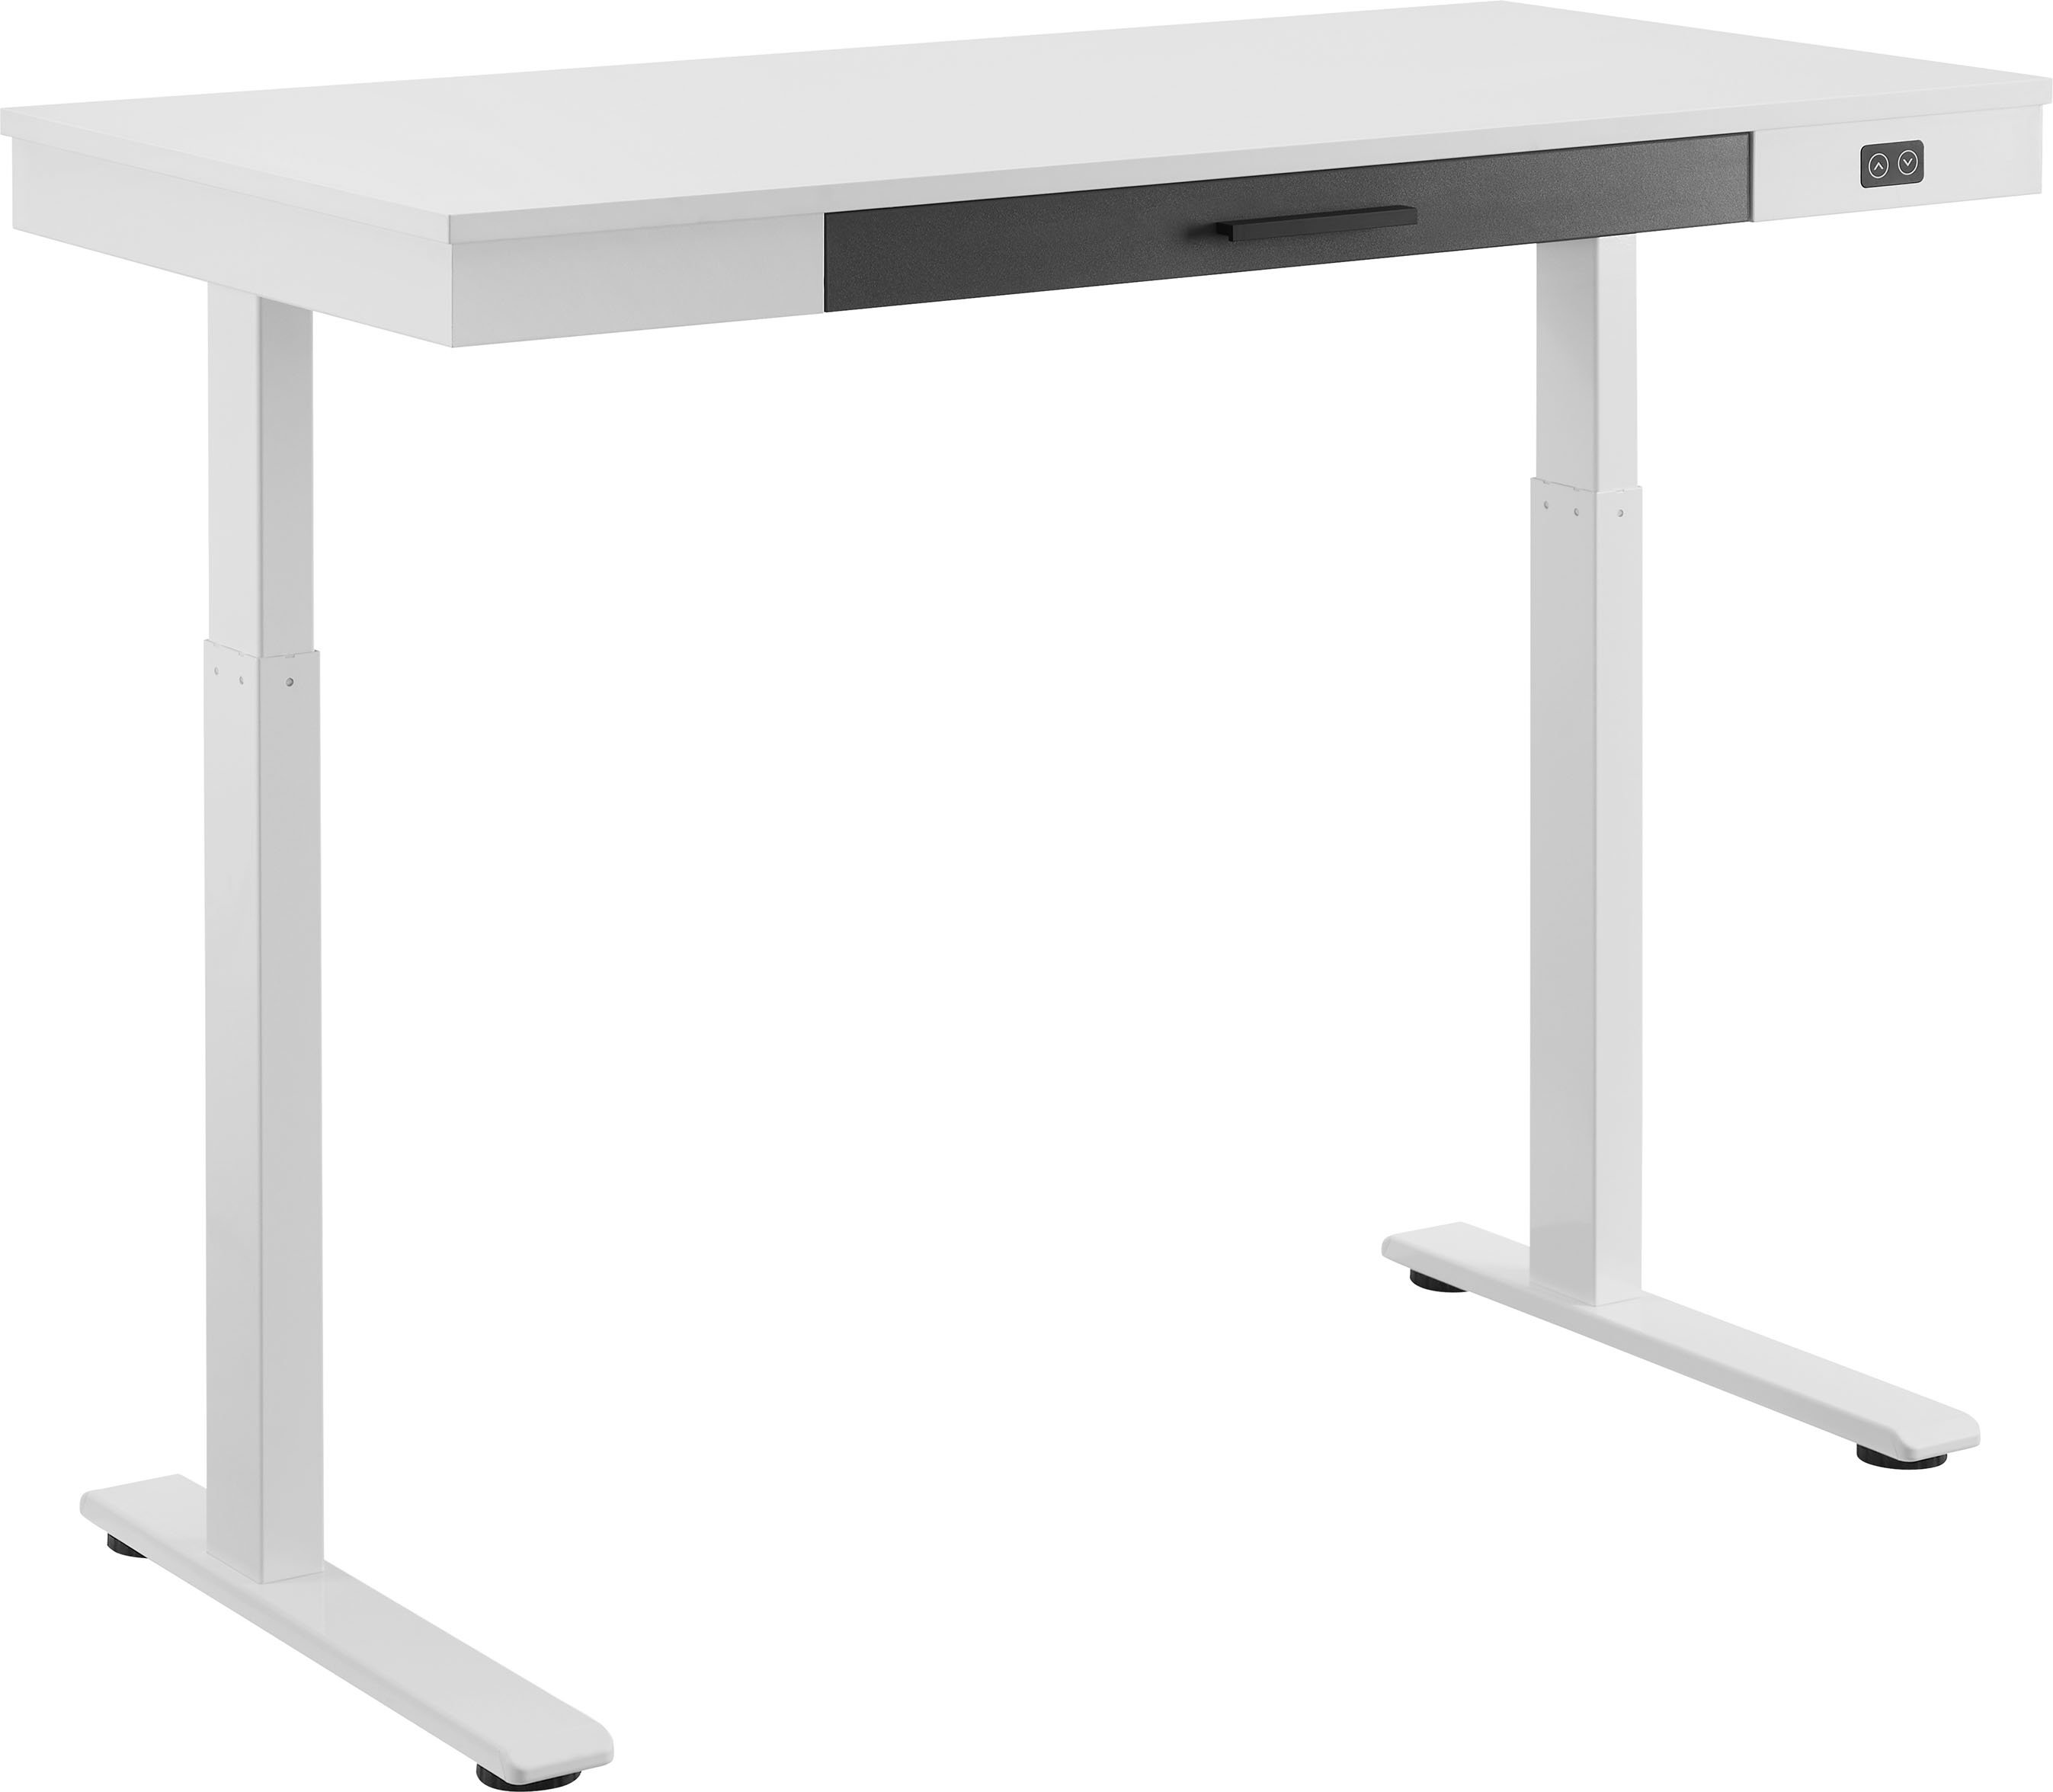 Angle View: Victor - Adjustable Standing Desk with Keyboard Tray - Charcoal Gray And Black